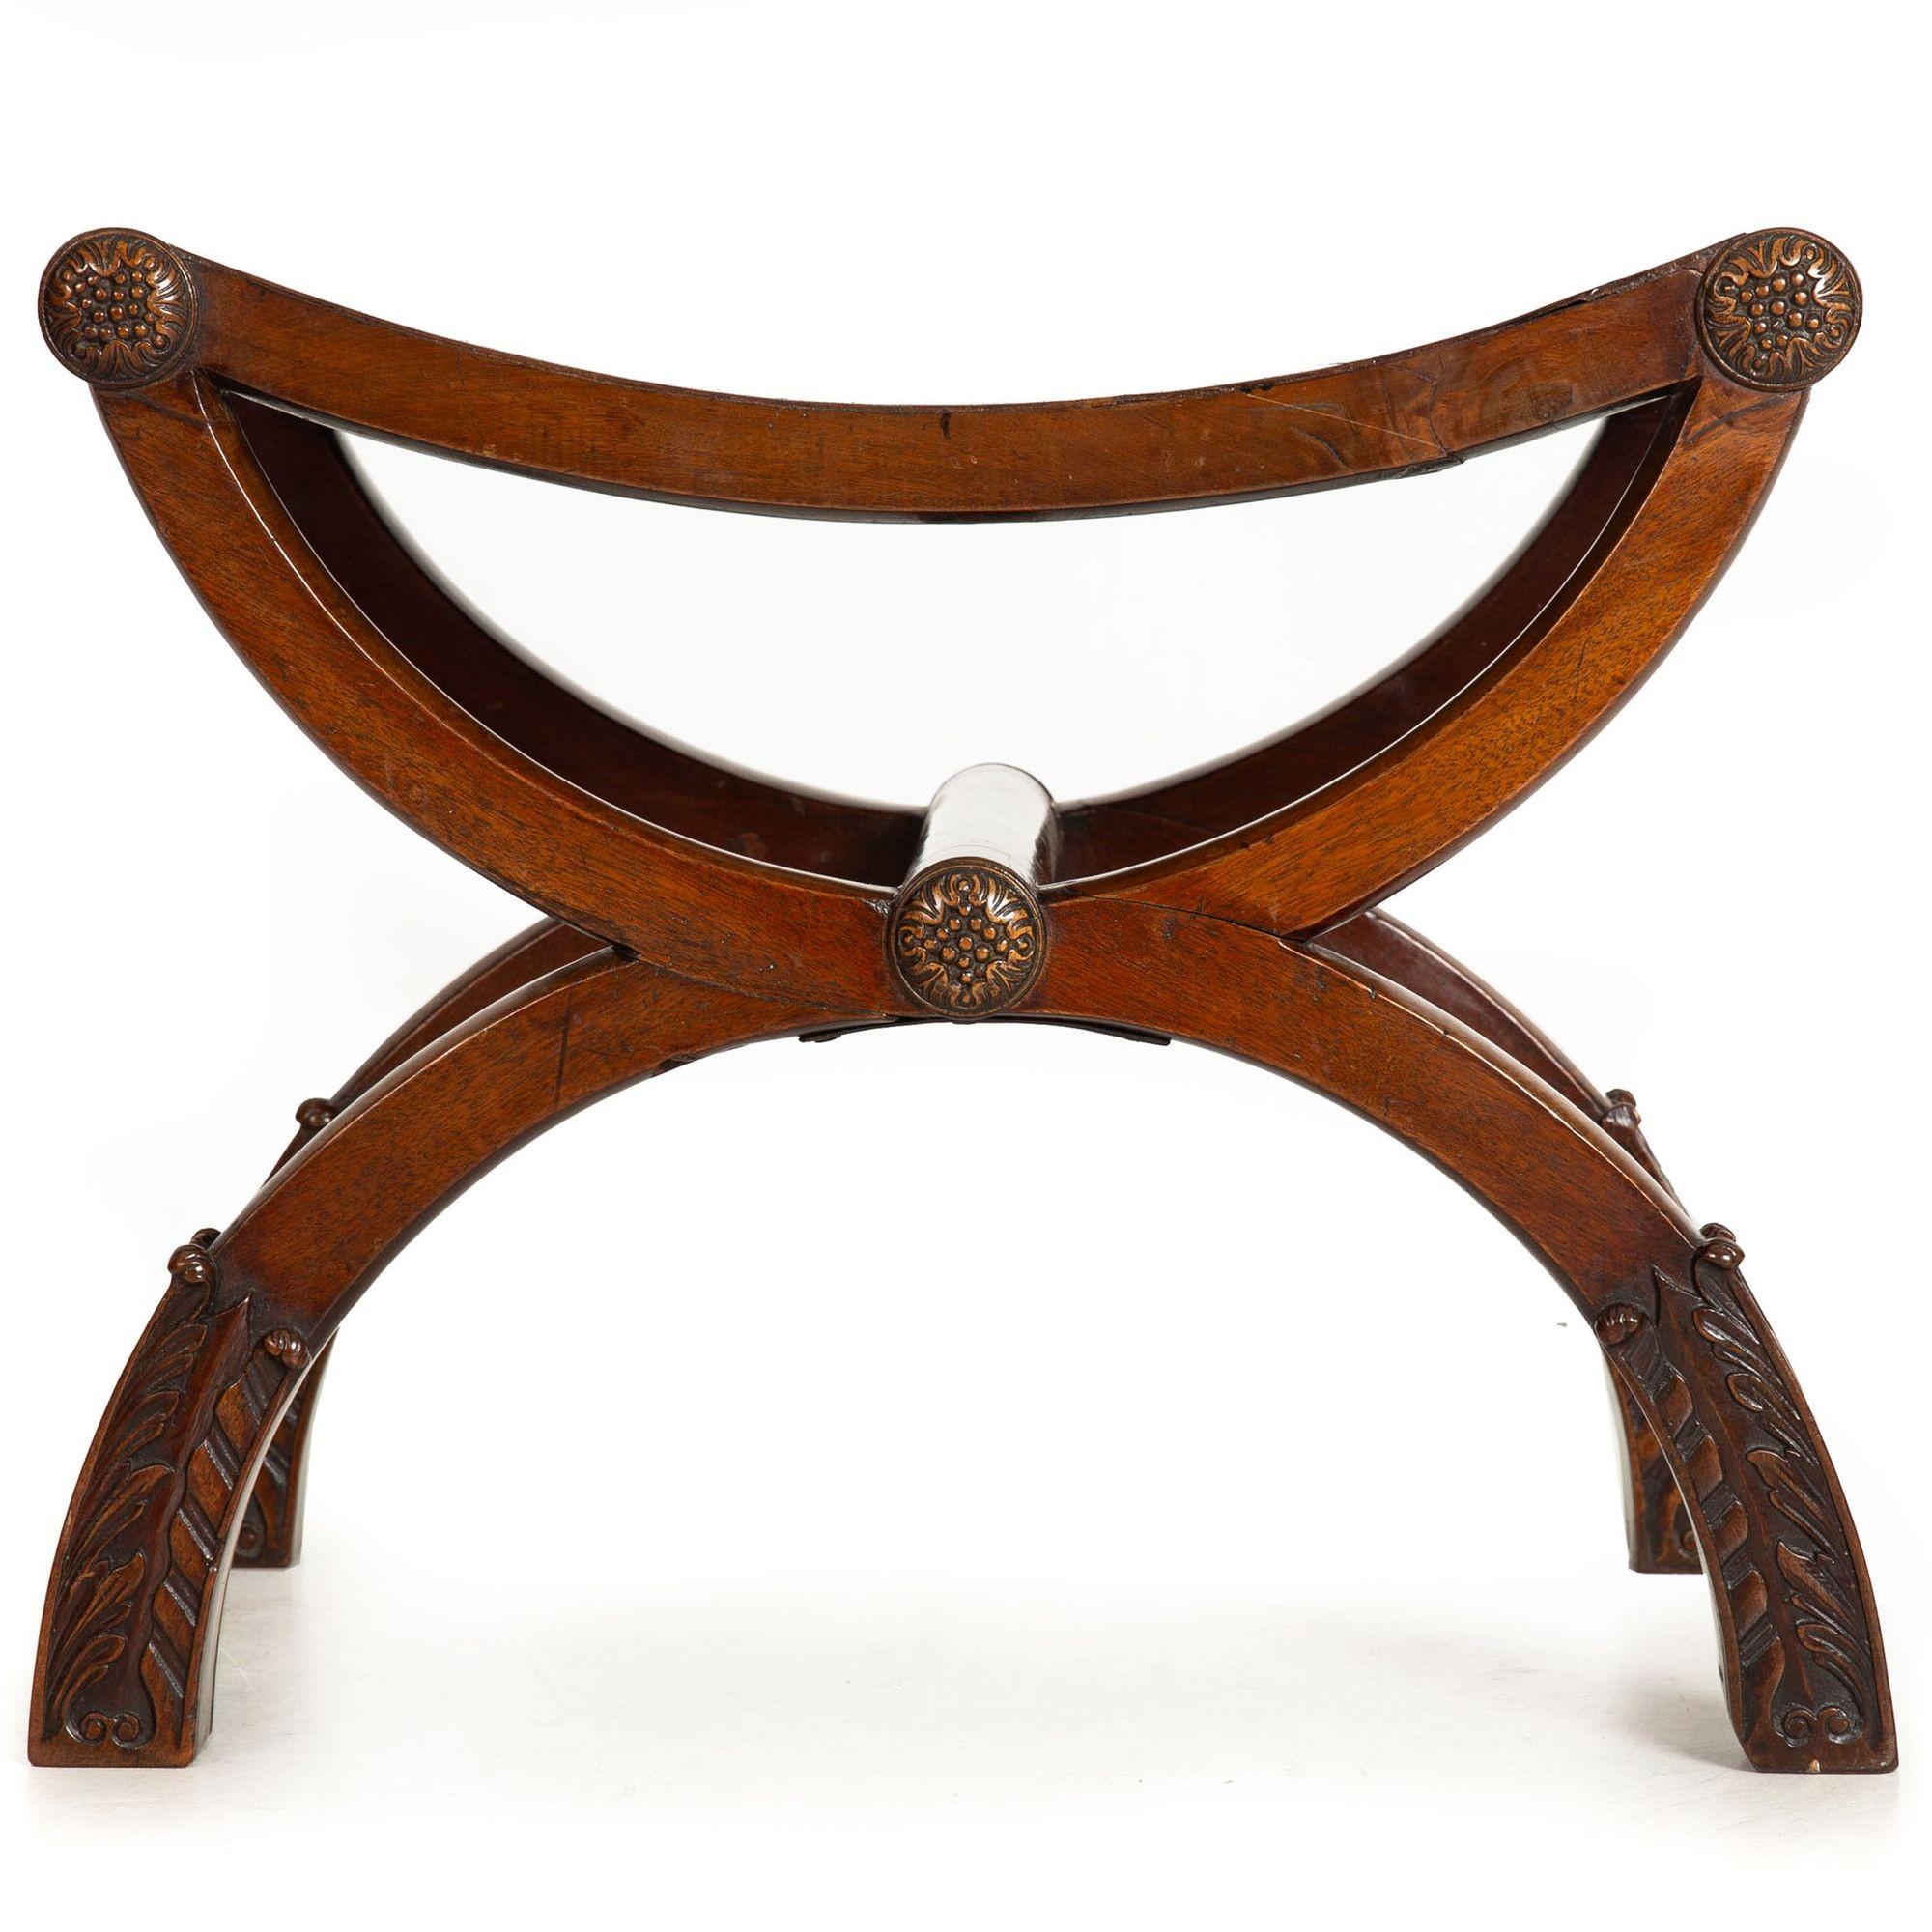 19th Century Fine English Regency Antique Mahogany Curule Curved Chair Bench c. 1815 For Sale